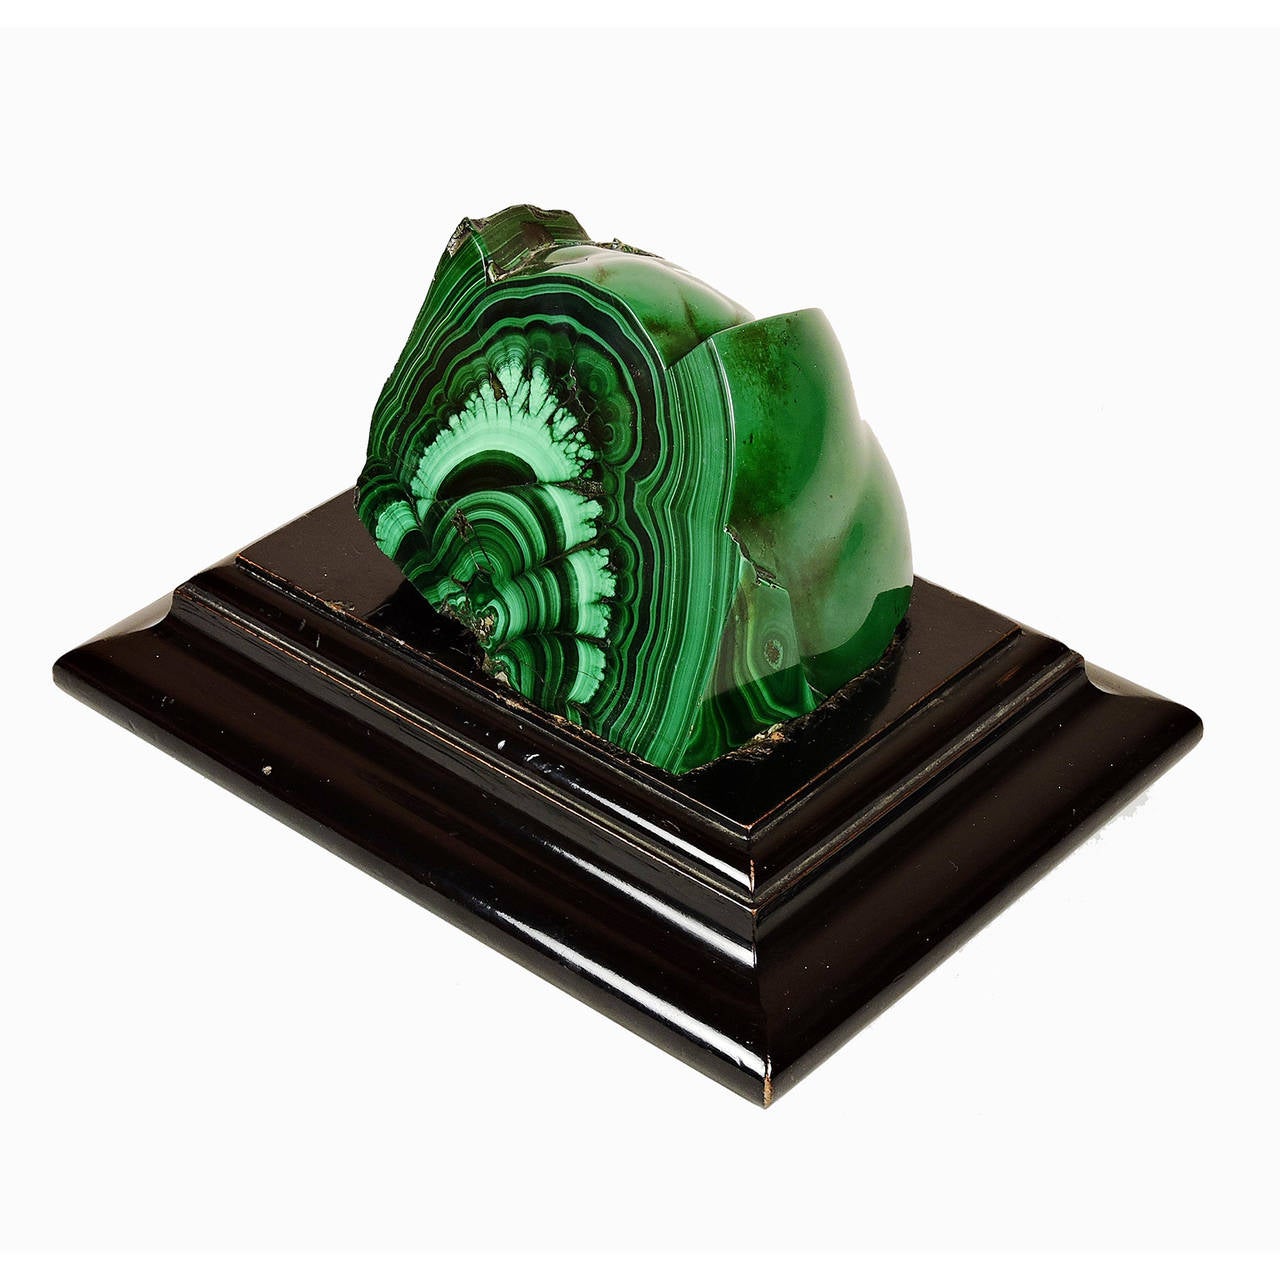 Exceptionally large Grand Tour malachite specimen, on a carved wood fitted stand.
Dimensions of specimen: 4 × 5 × 4 inches. On stand: 5.5 × 10 × 7.5 inches.